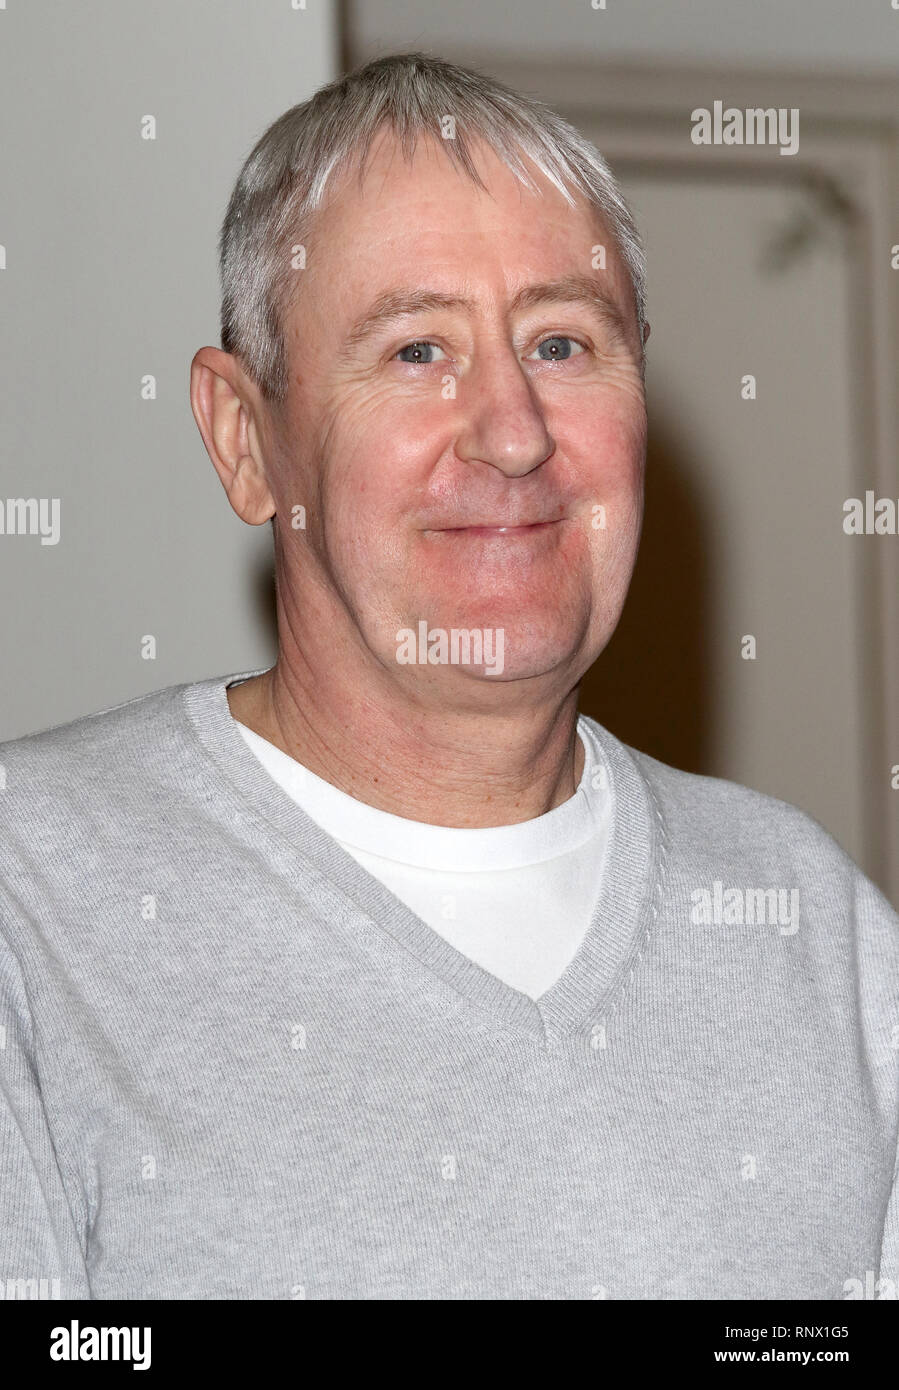 Nicholas Lyndhurst seen during the Man of La Mancha Press Launch for The English National Opera's production of musical inspired by Miguel de Cervanteâ€™s Don Quixote, at the Coliseum Theatre, St Martin's Lane. Stock Photo